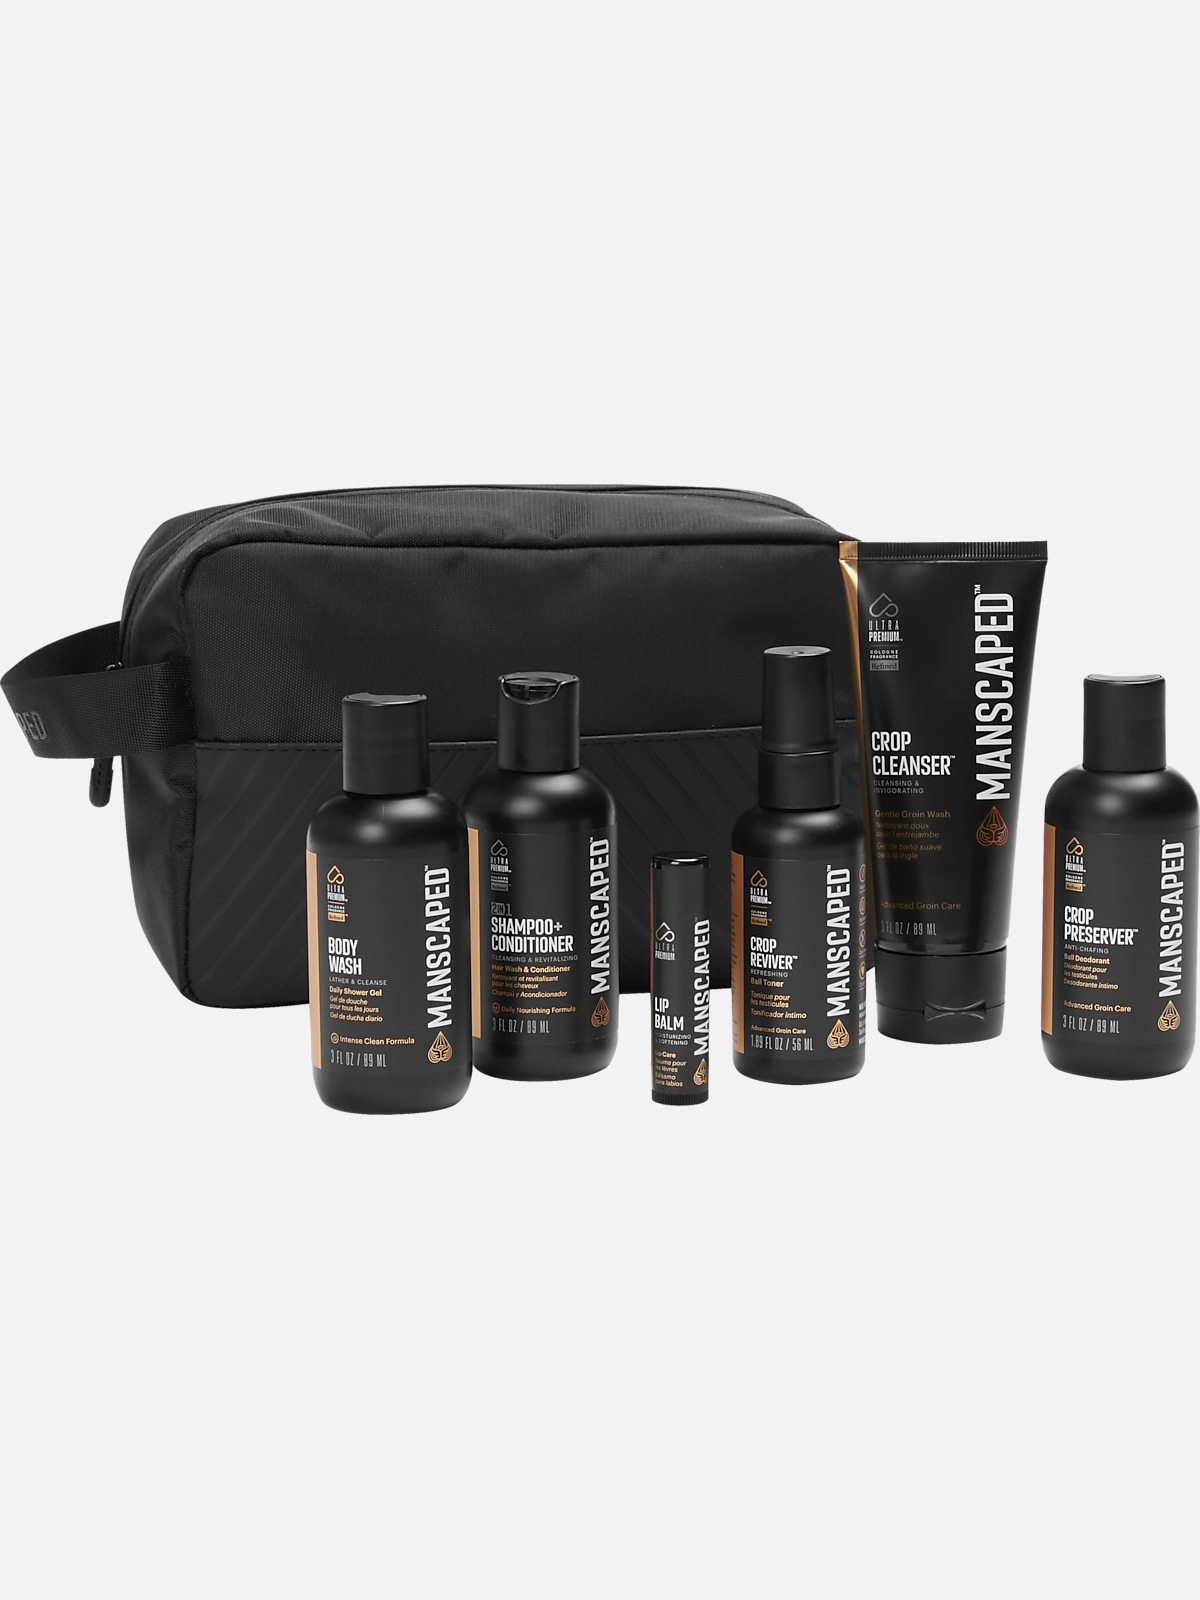 Manscaped Refined Weekender Kit | All Clearance $39.99| Men's Wearhouse